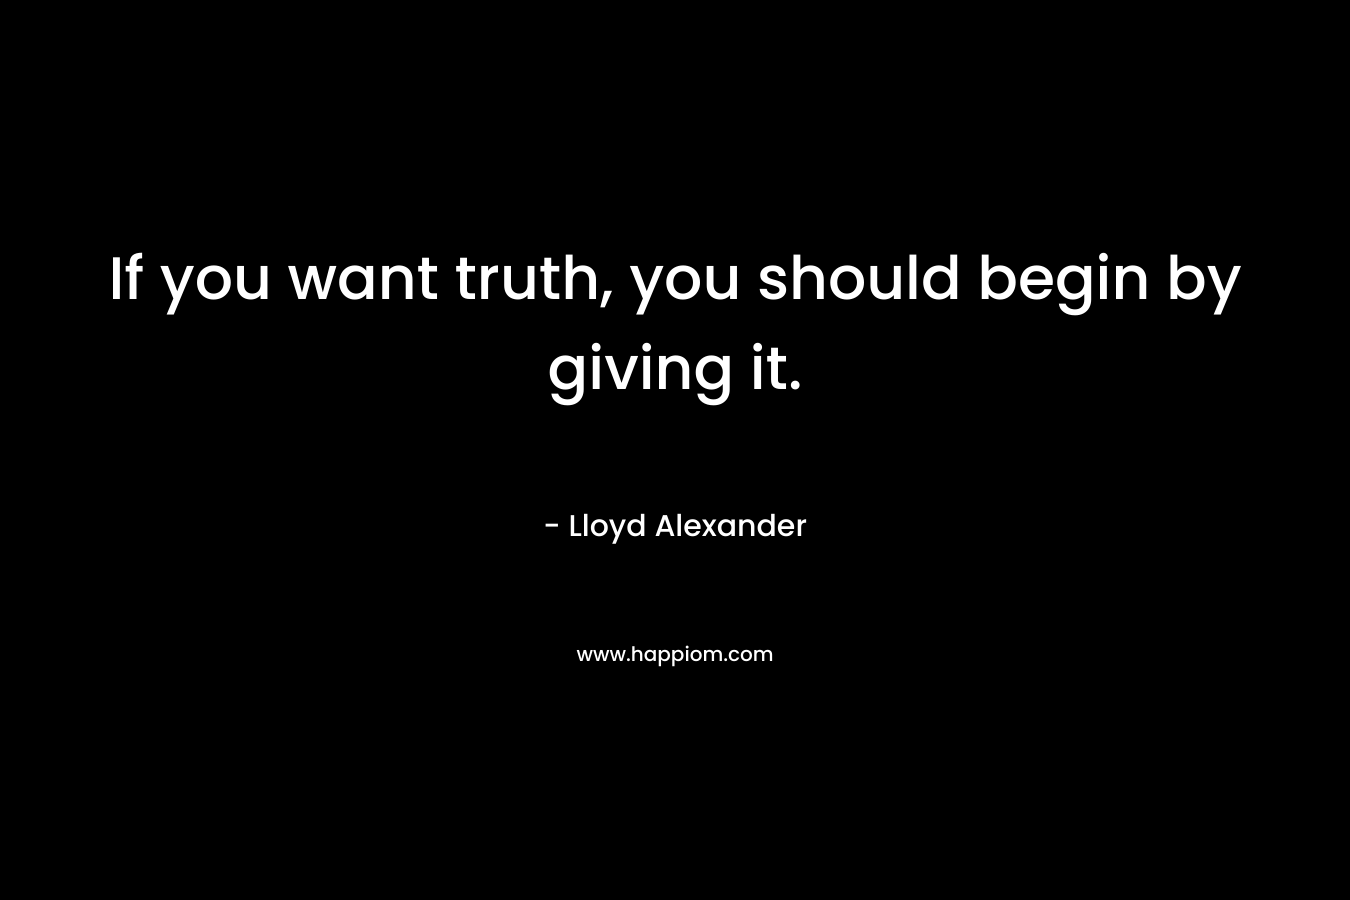 If you want truth, you should begin by giving it.